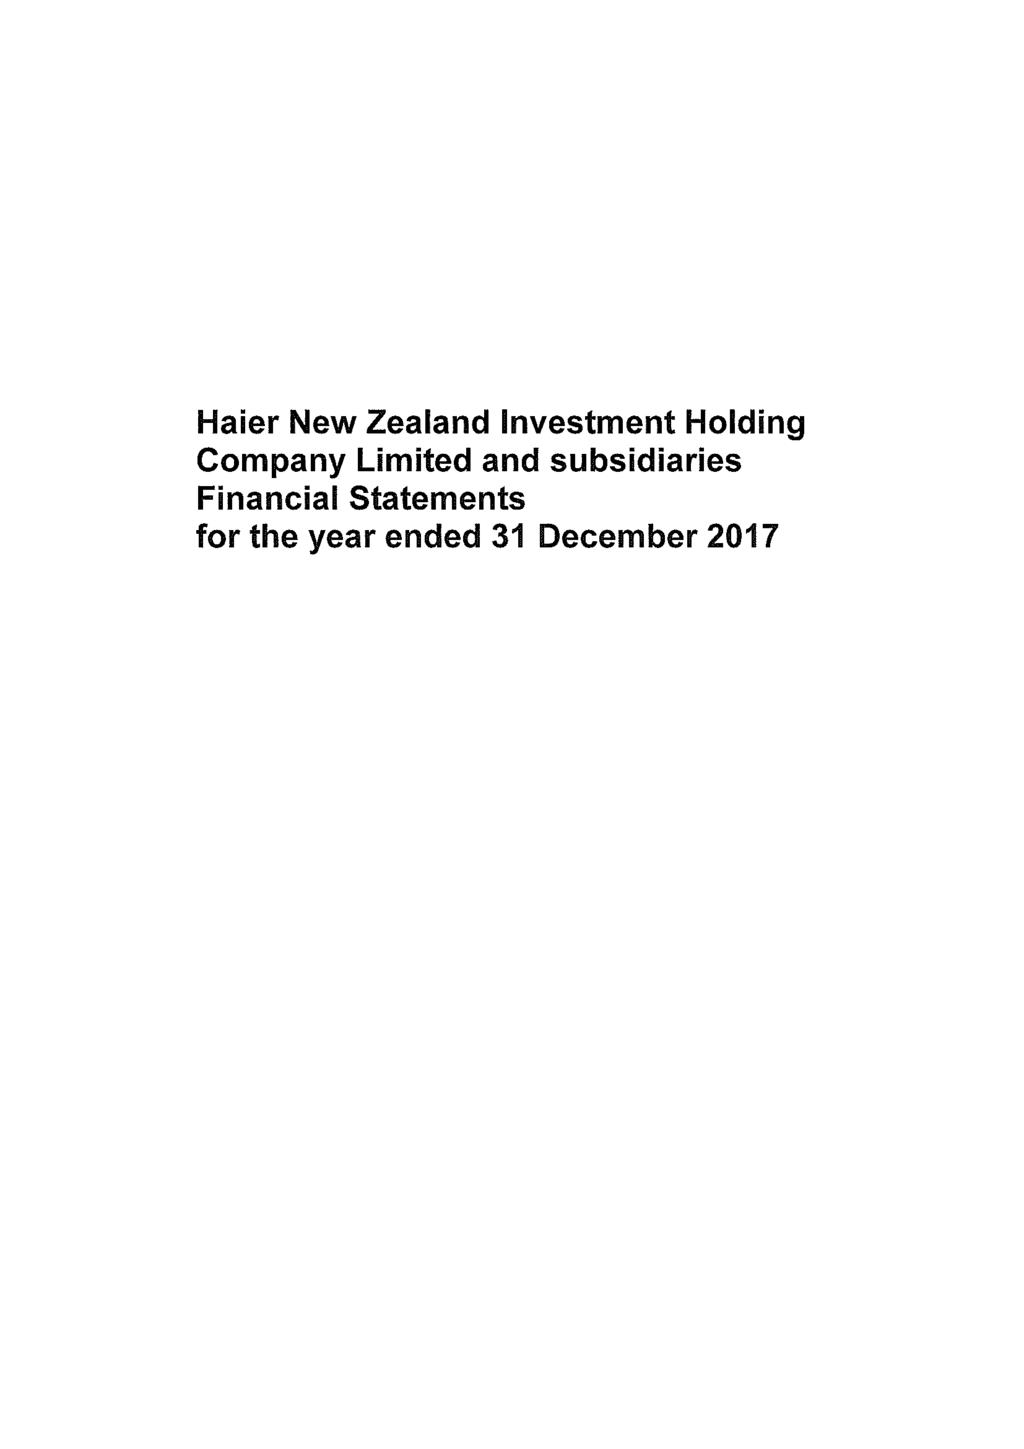 Haier New Zealand Investment Holding Company Limited and